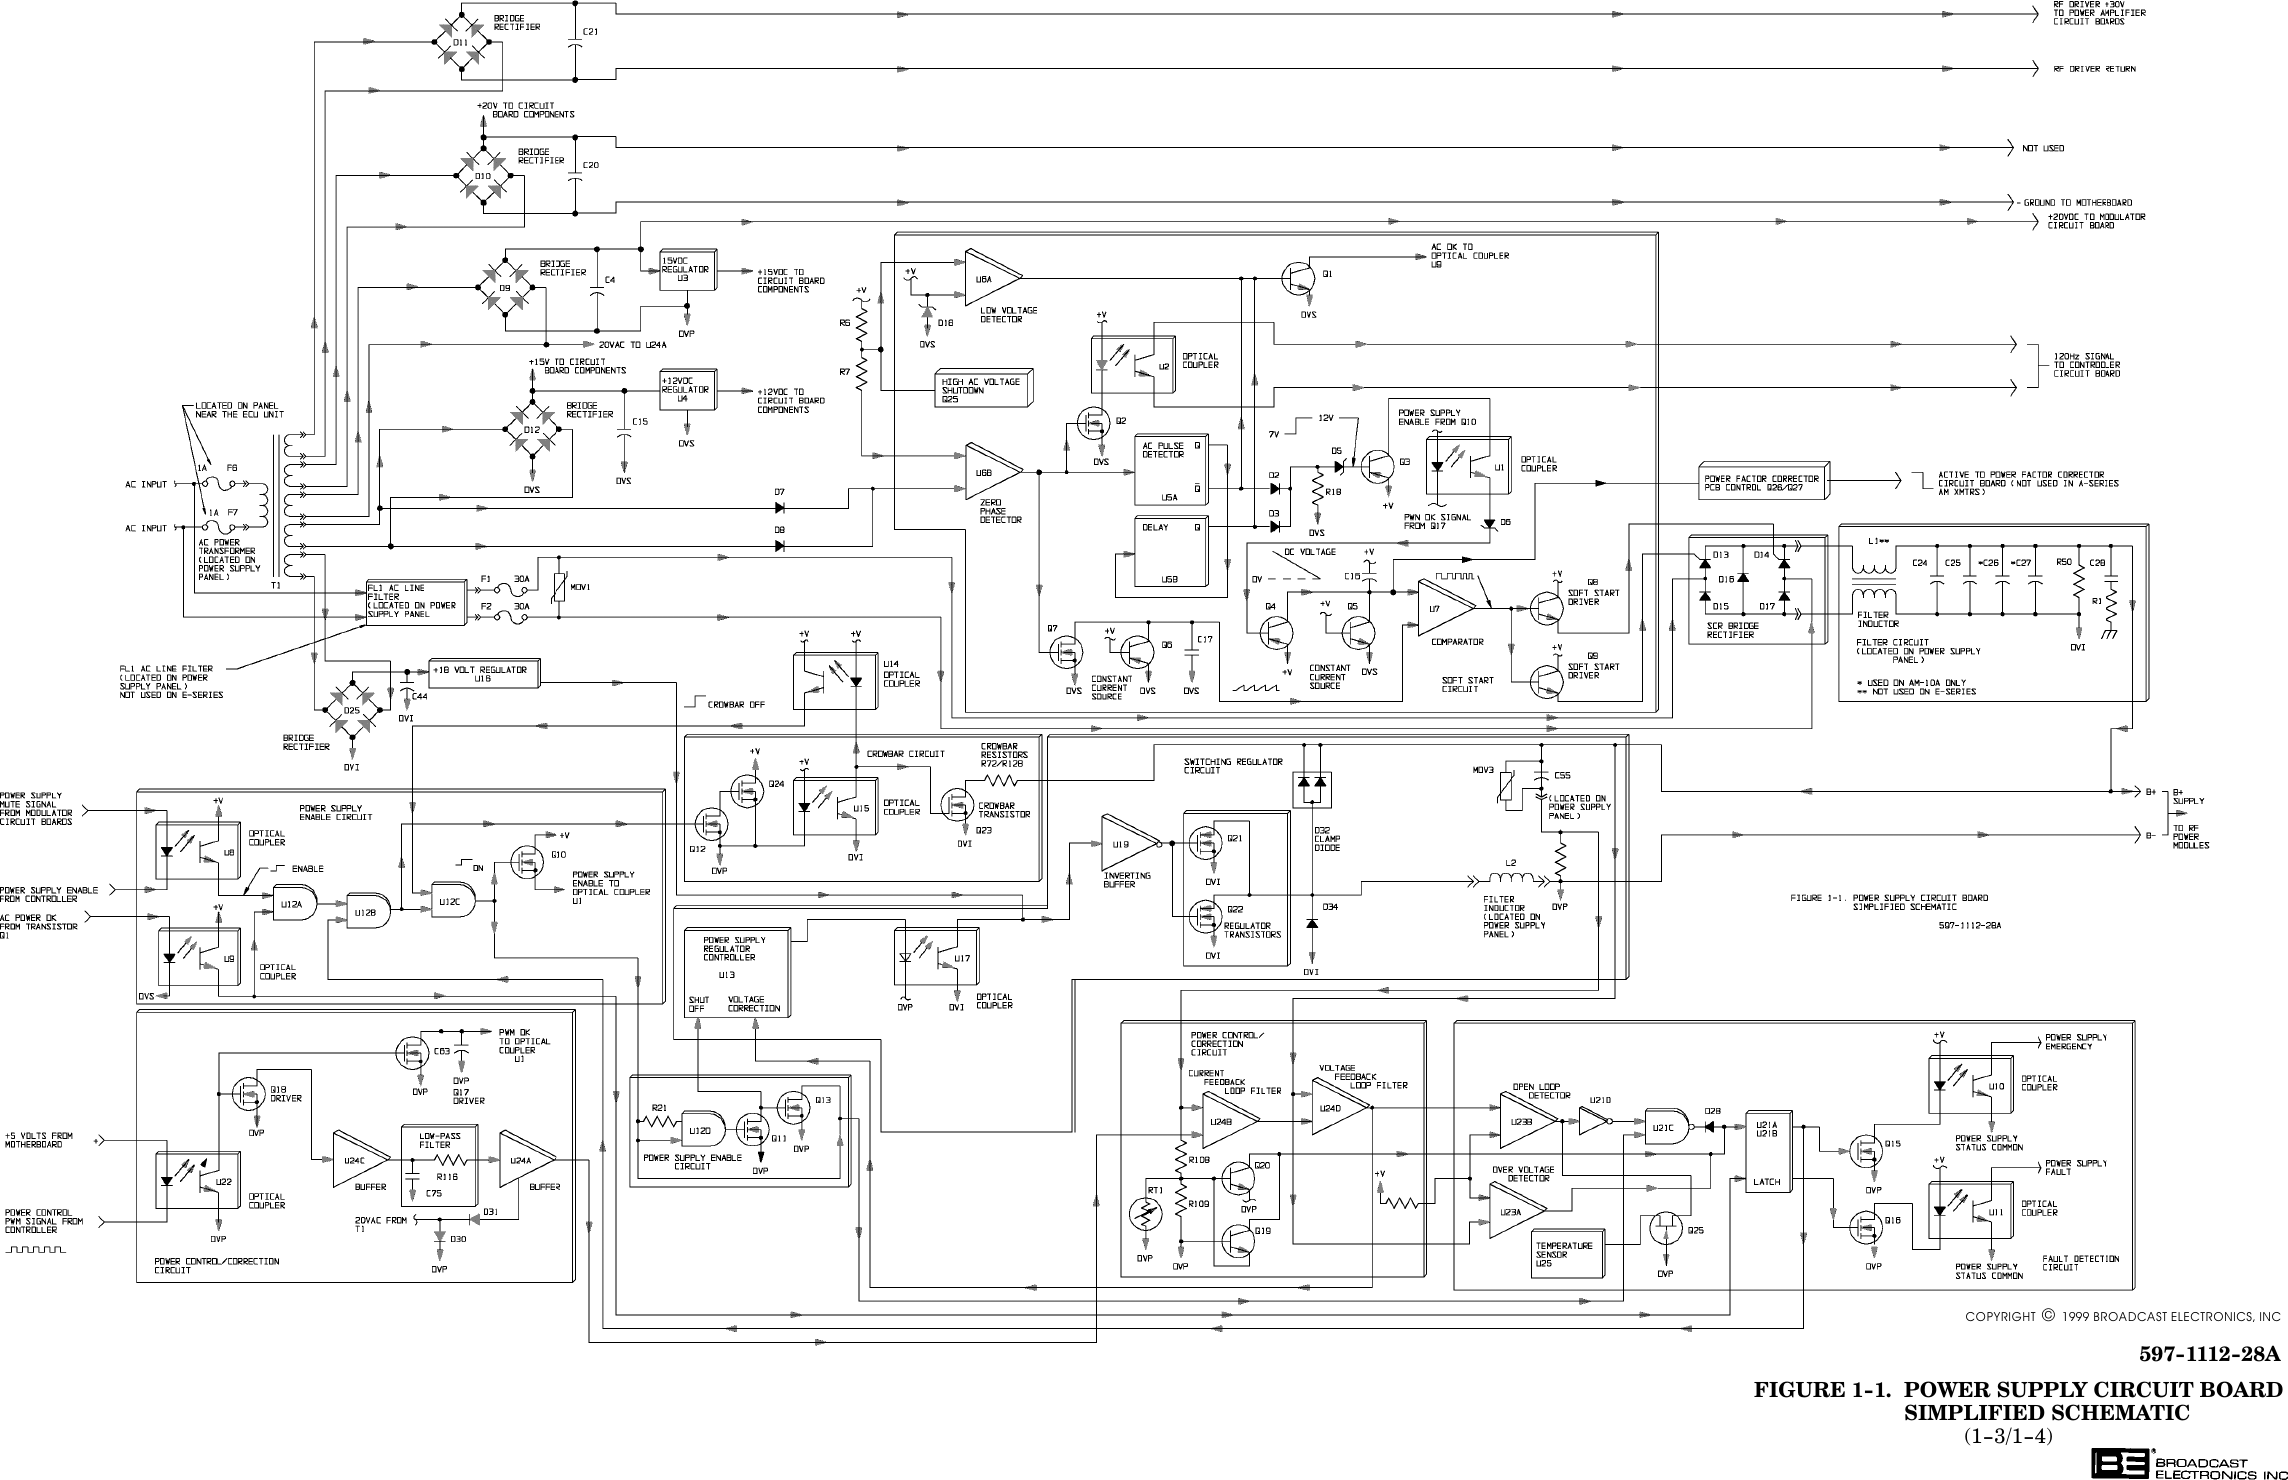 597-1112-28AFIGURE 1-1. POWER SUPPLY CIRCUIT BOARDSIMPLIFIED SCHEMATIC(1-3/1-4)COPYRIGHT  1999 BROADCAST ELECTRONICS, INC